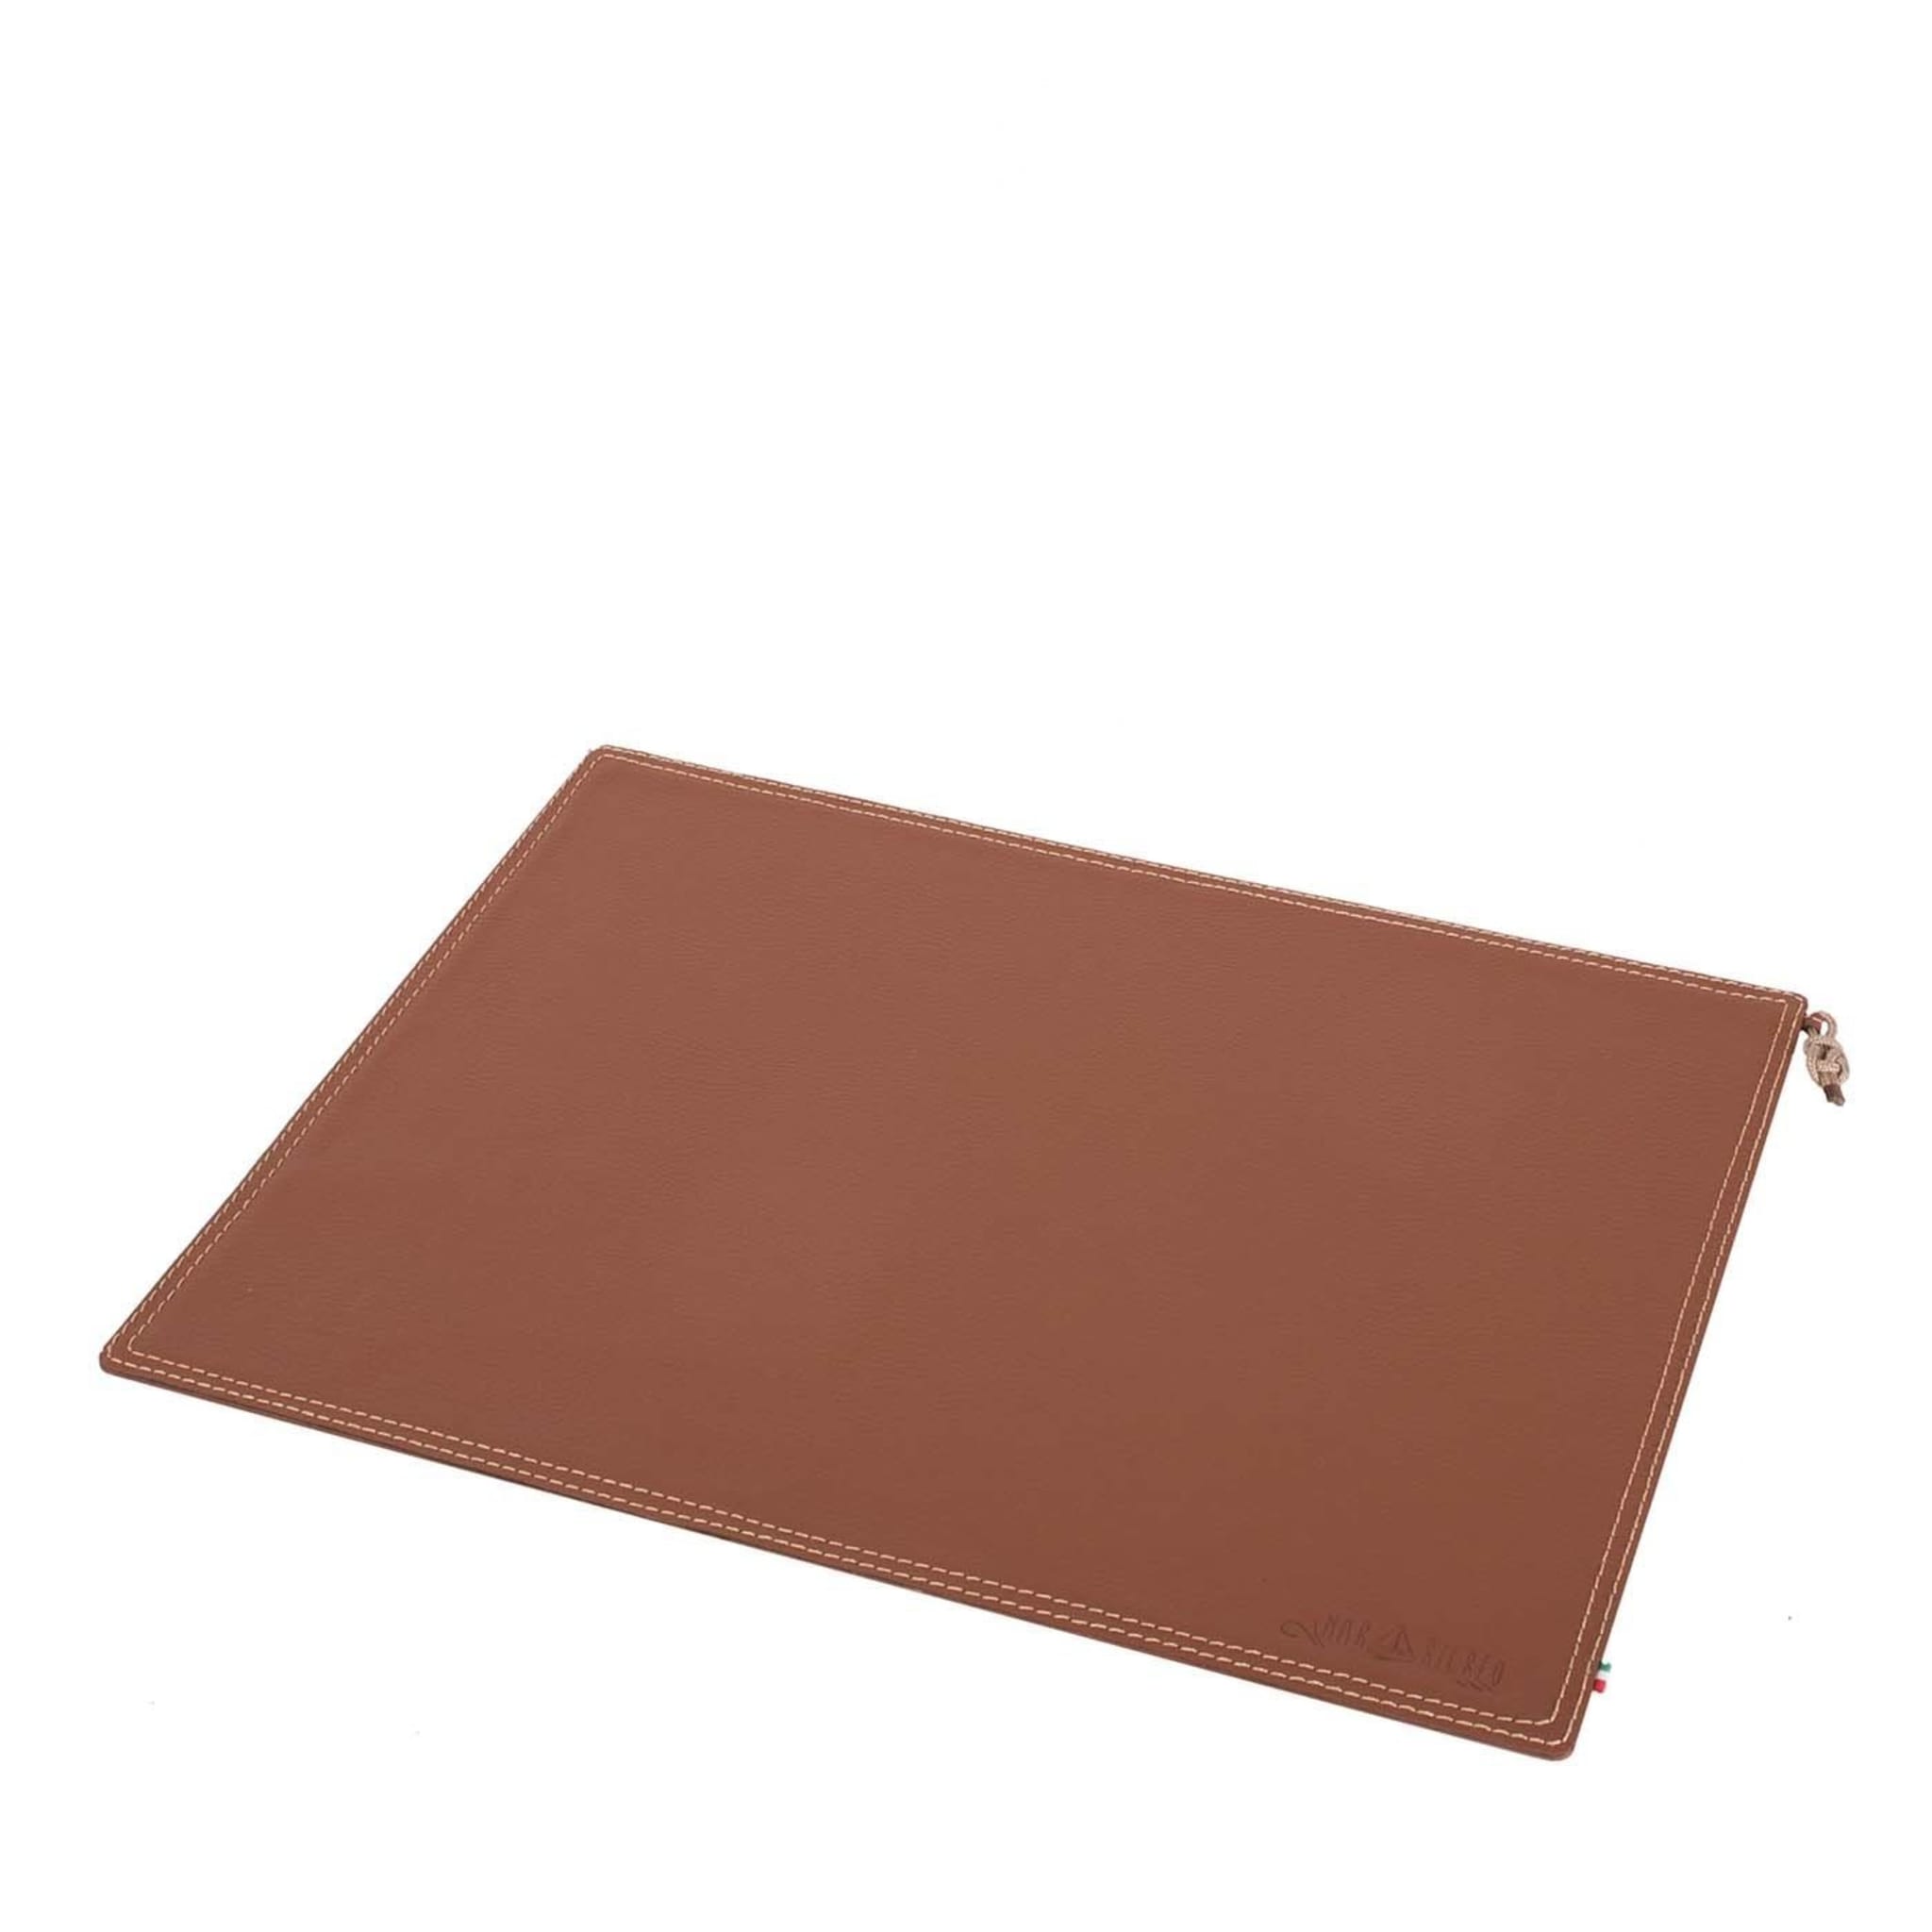 Beige Leather Desk Pad - Main view